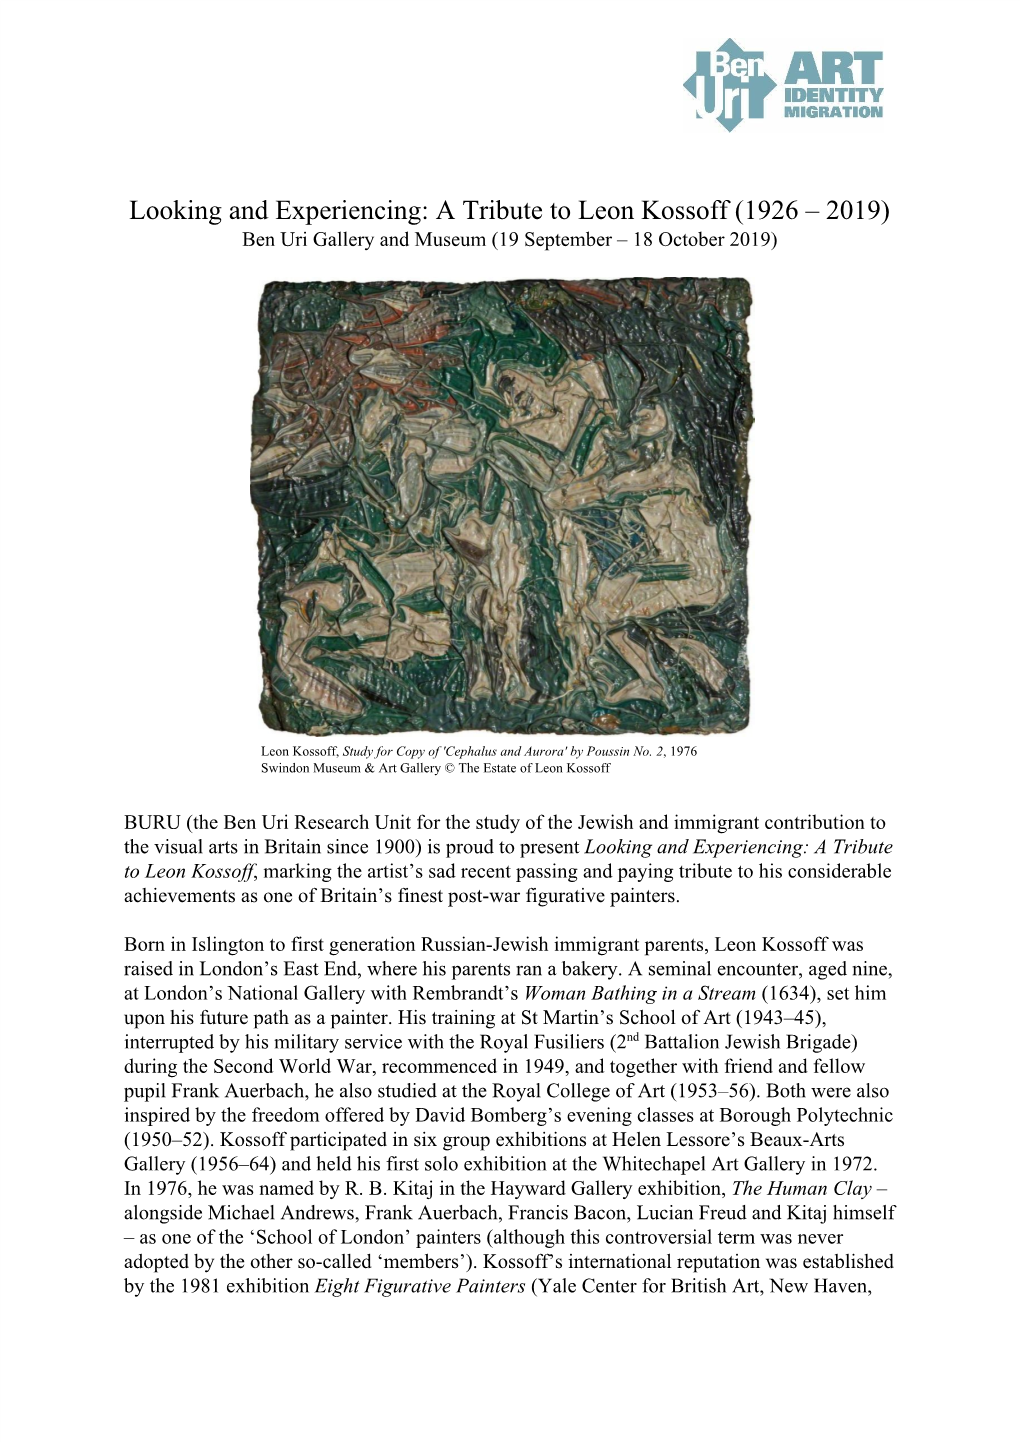 A Tribute to Leon Kossoff (1926 – 2019) Ben Uri Gallery and Museum (19 September – 18 October 2019)